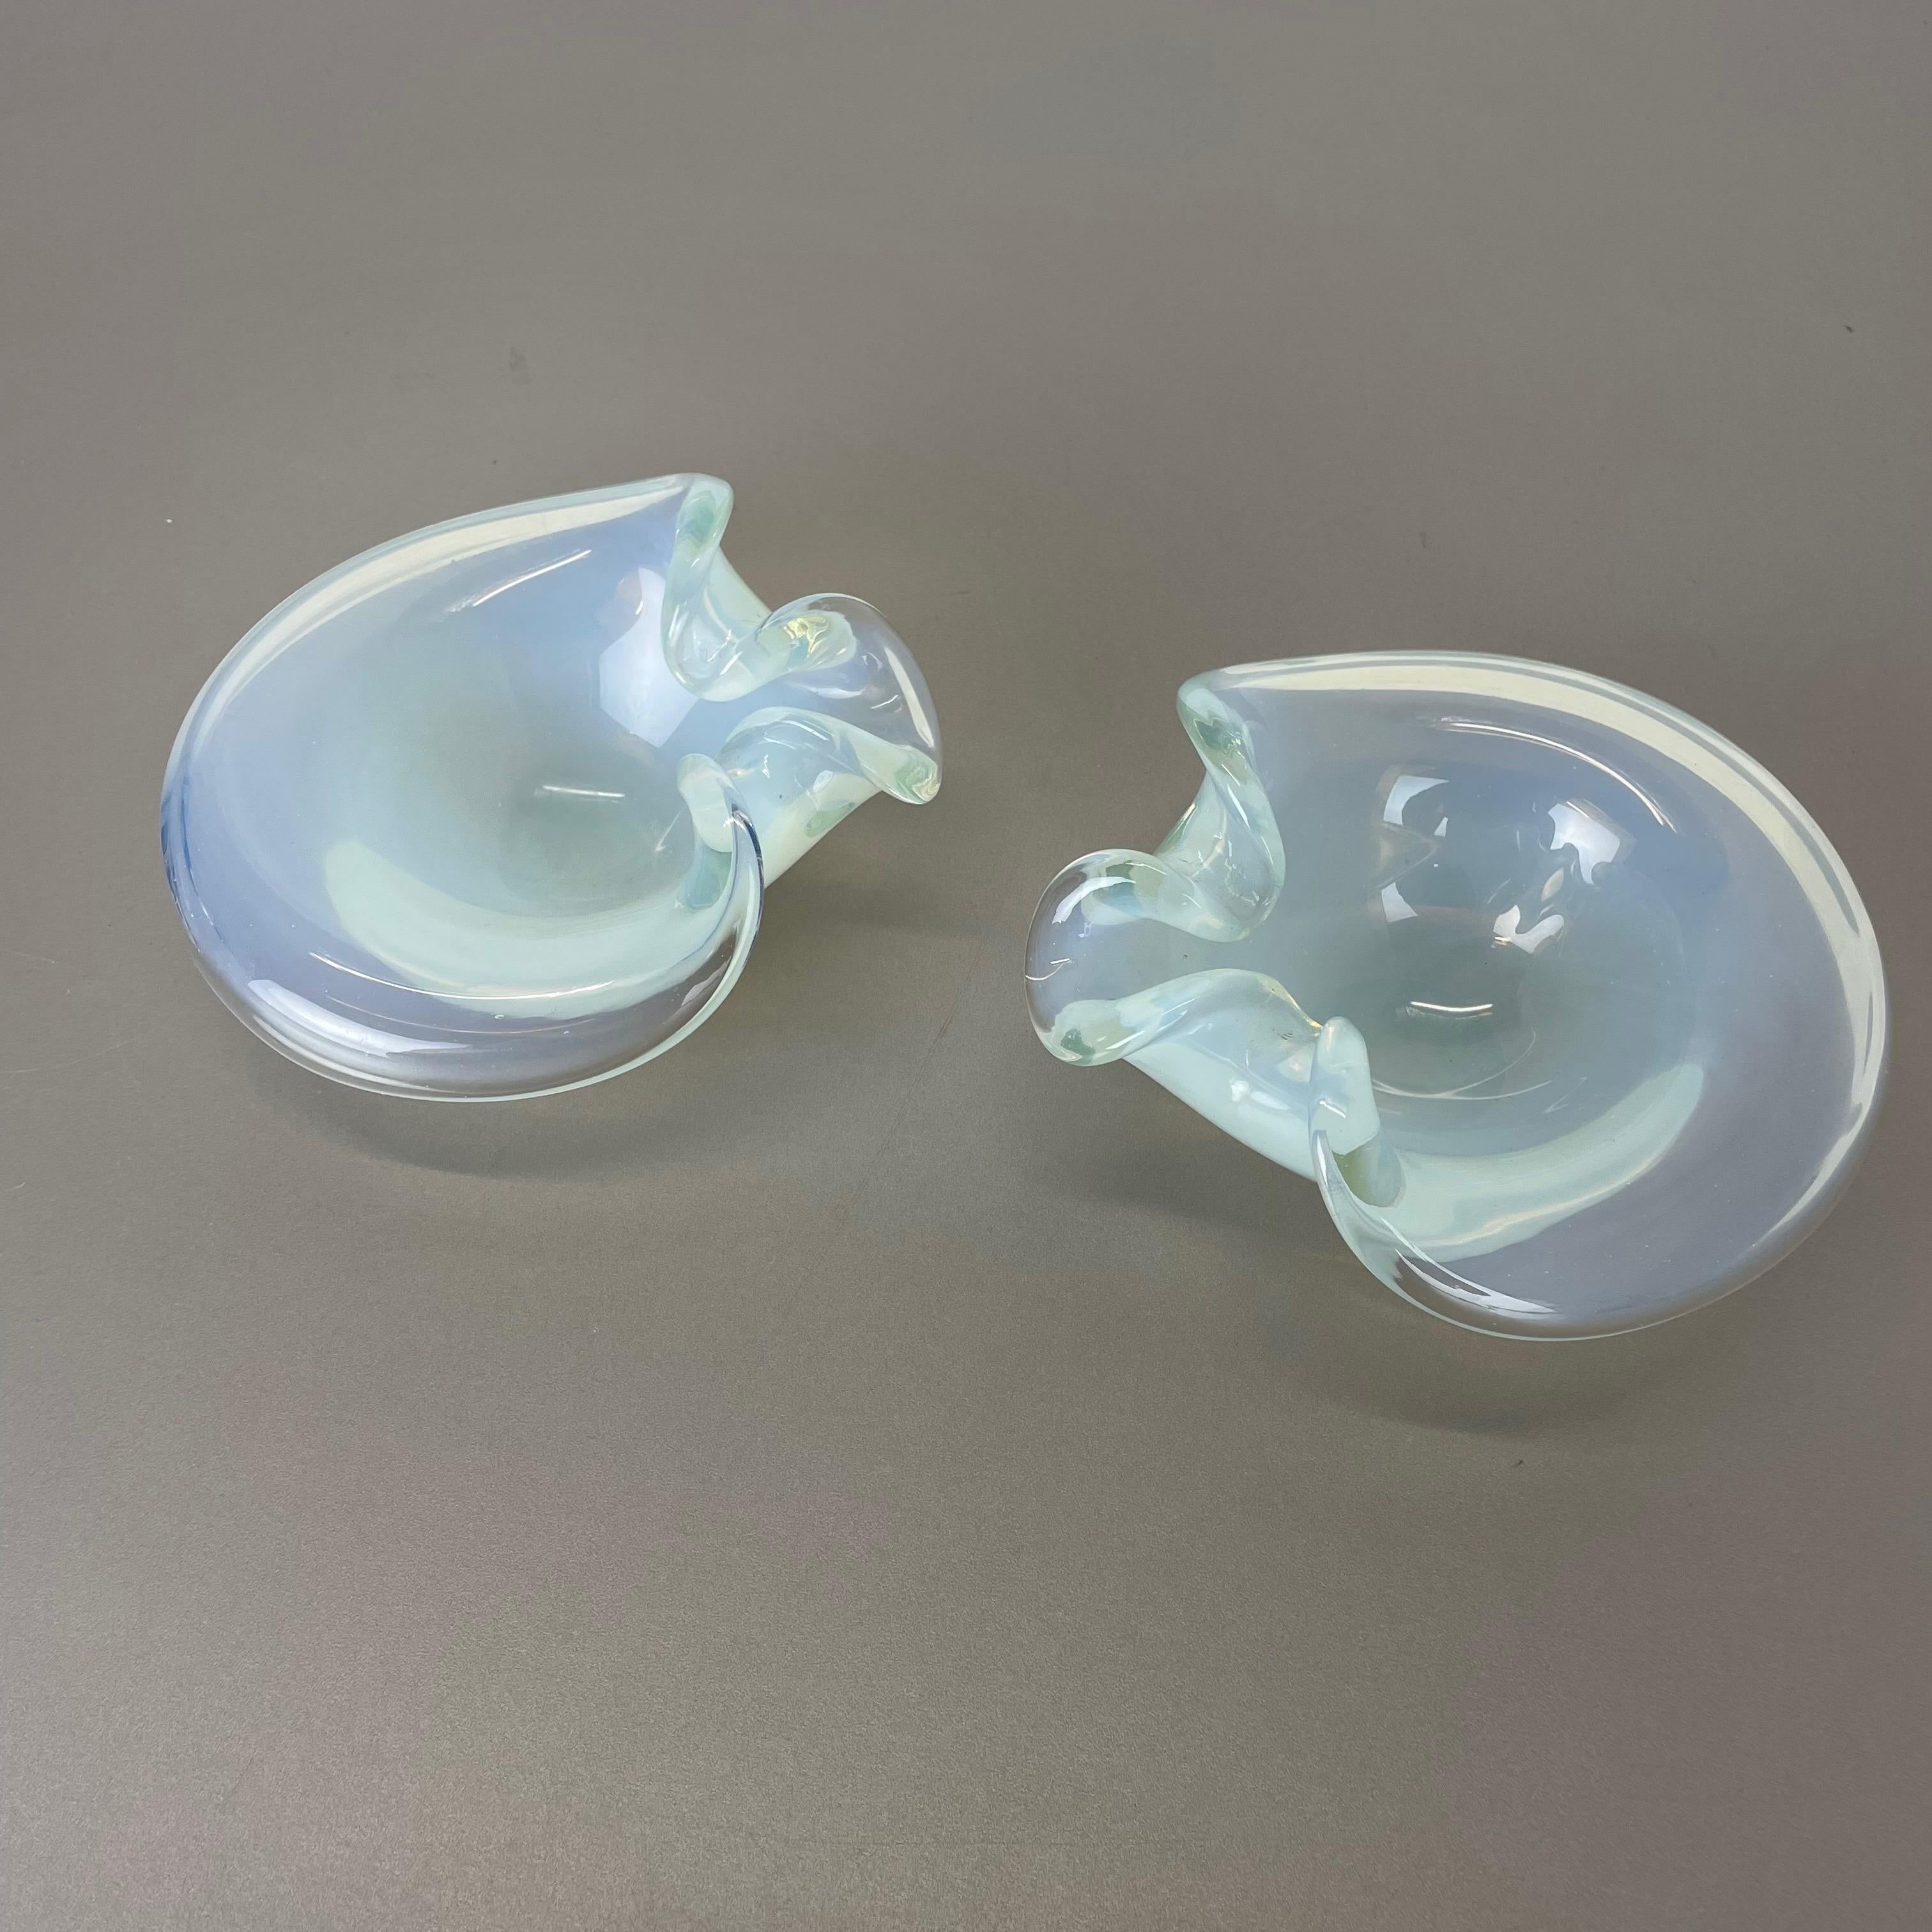 Set of 2 New Old Stock, Murano Glass Shell Bowl by Antonio da Ros Cenedese, 1960 For Sale 6